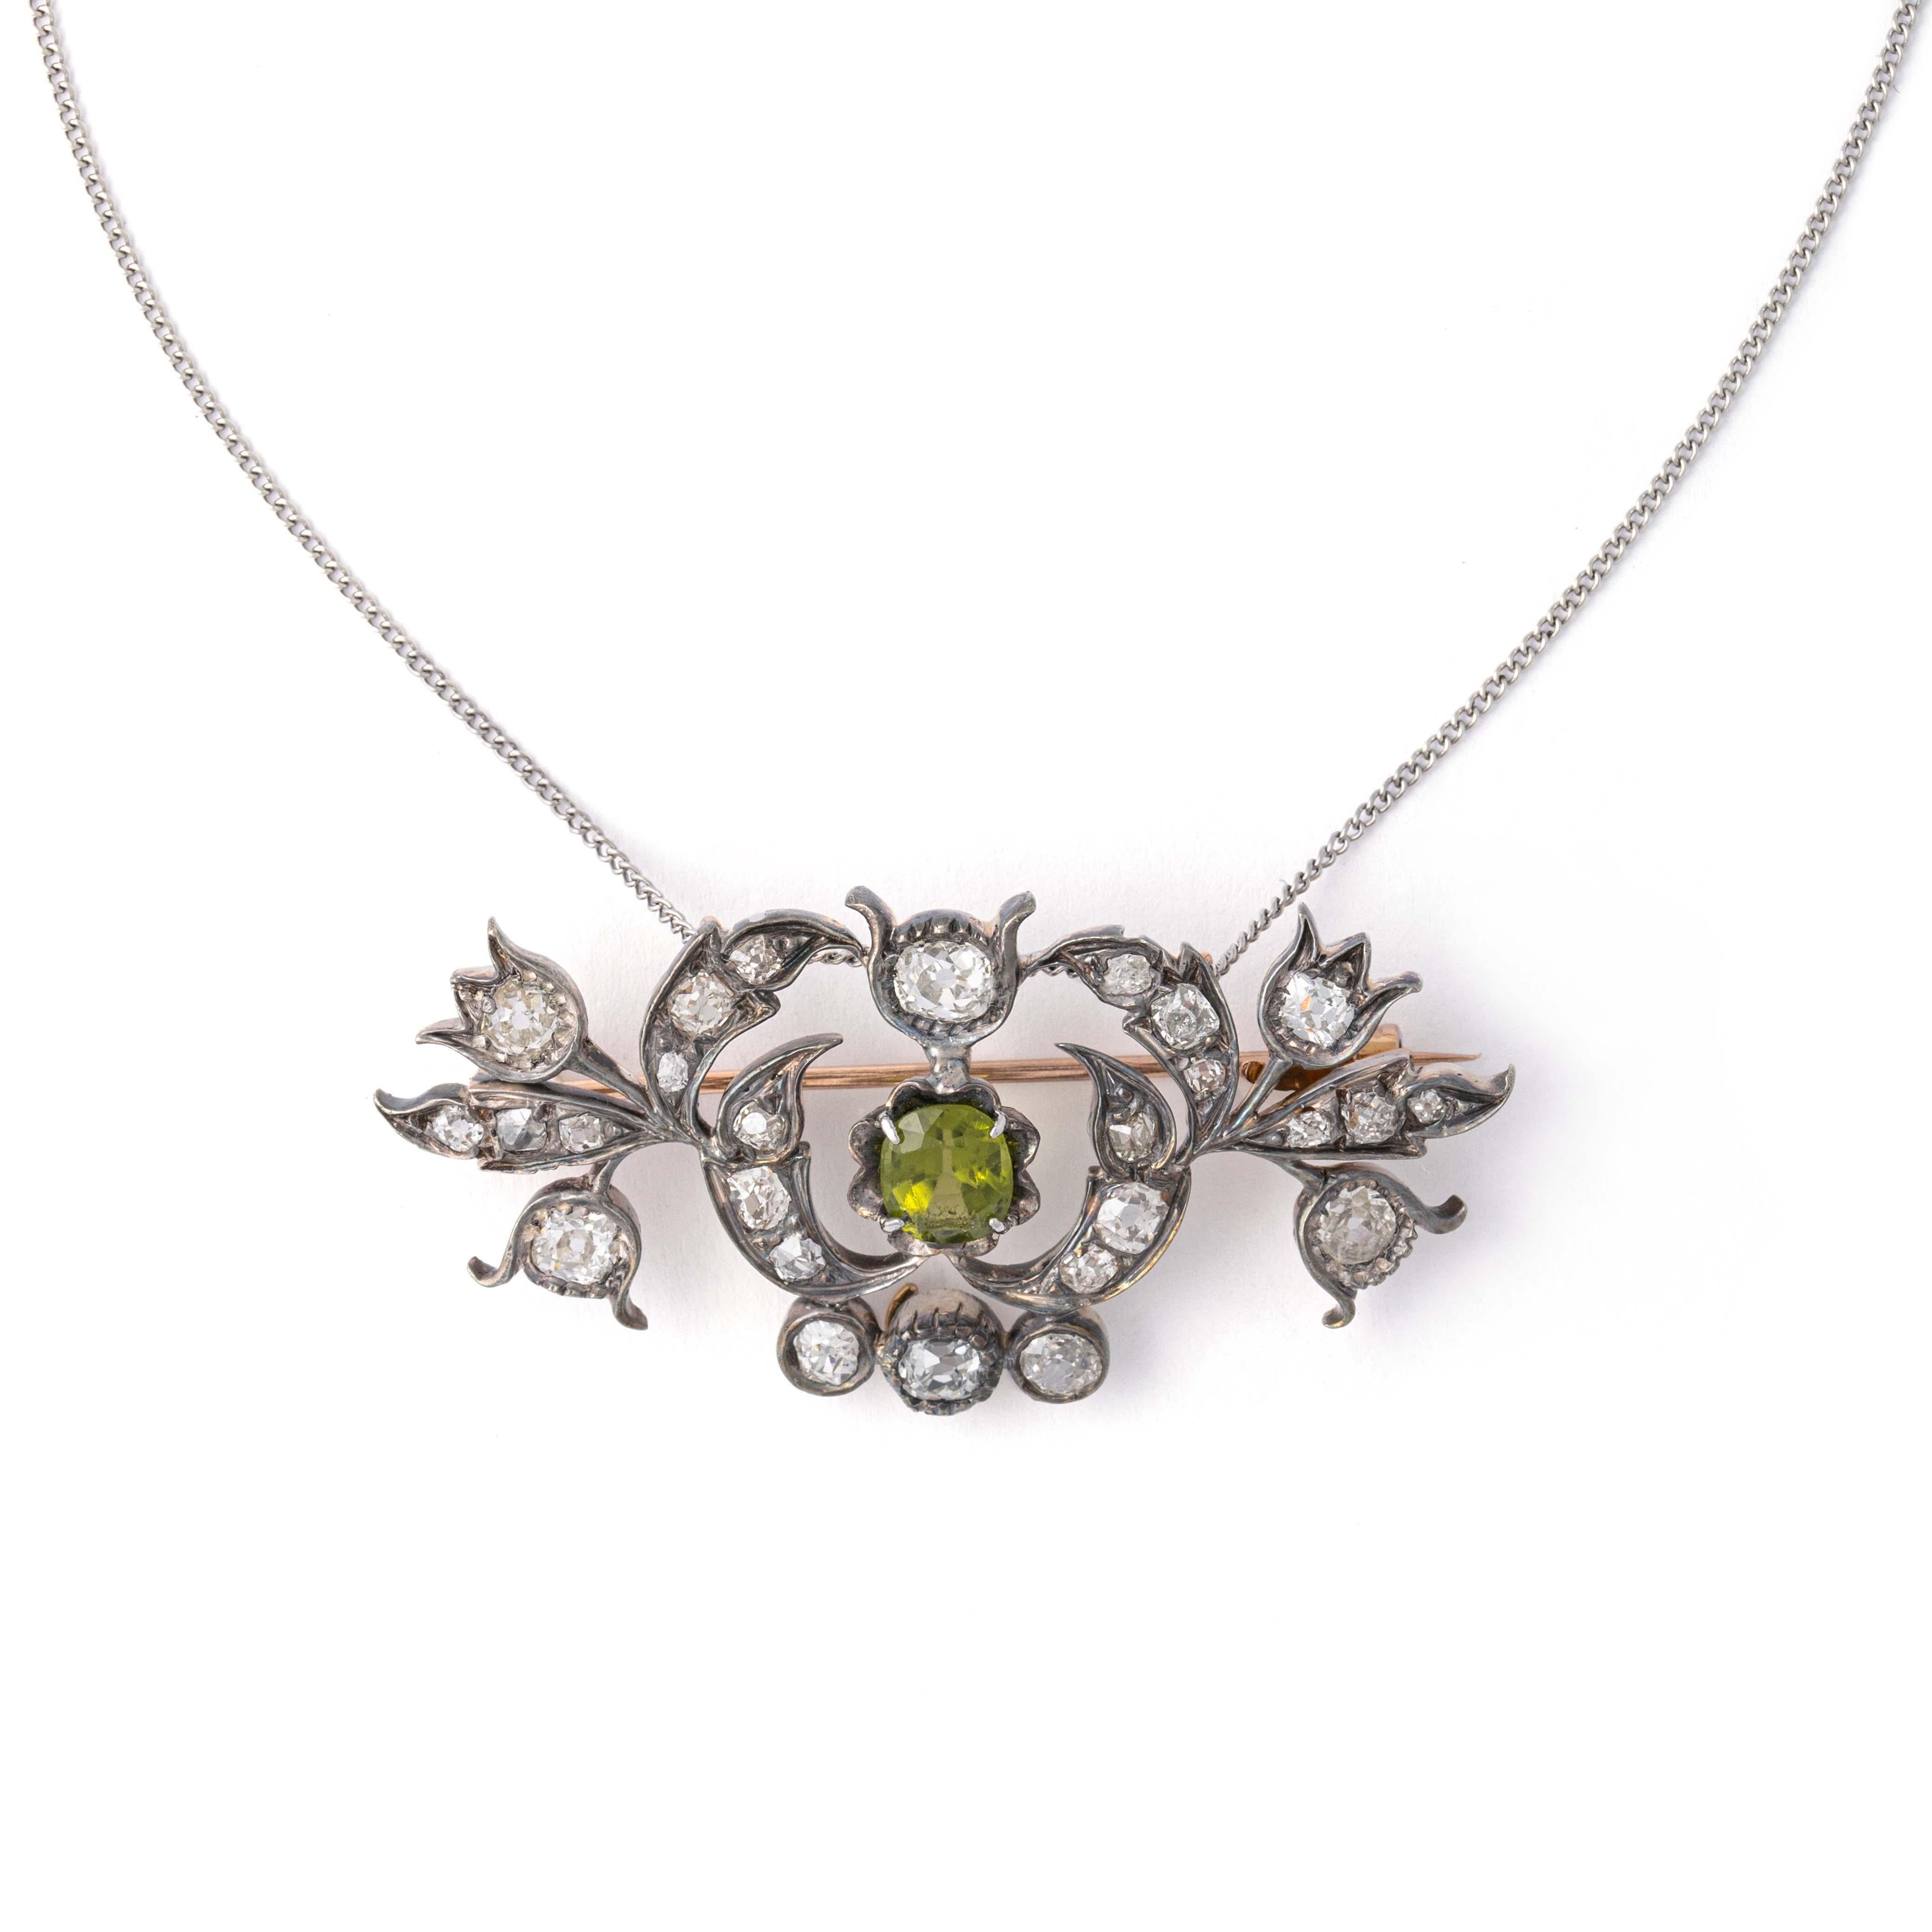 Antique Old mine cut Diamond and cushion old mine cut Peridot on silver and gold Brooch convertible Pendant.
The Pear shape old mine cut Diamond can be detached and worn as a separate pendant. 
The pear shape Diamond is estimated to weight in our